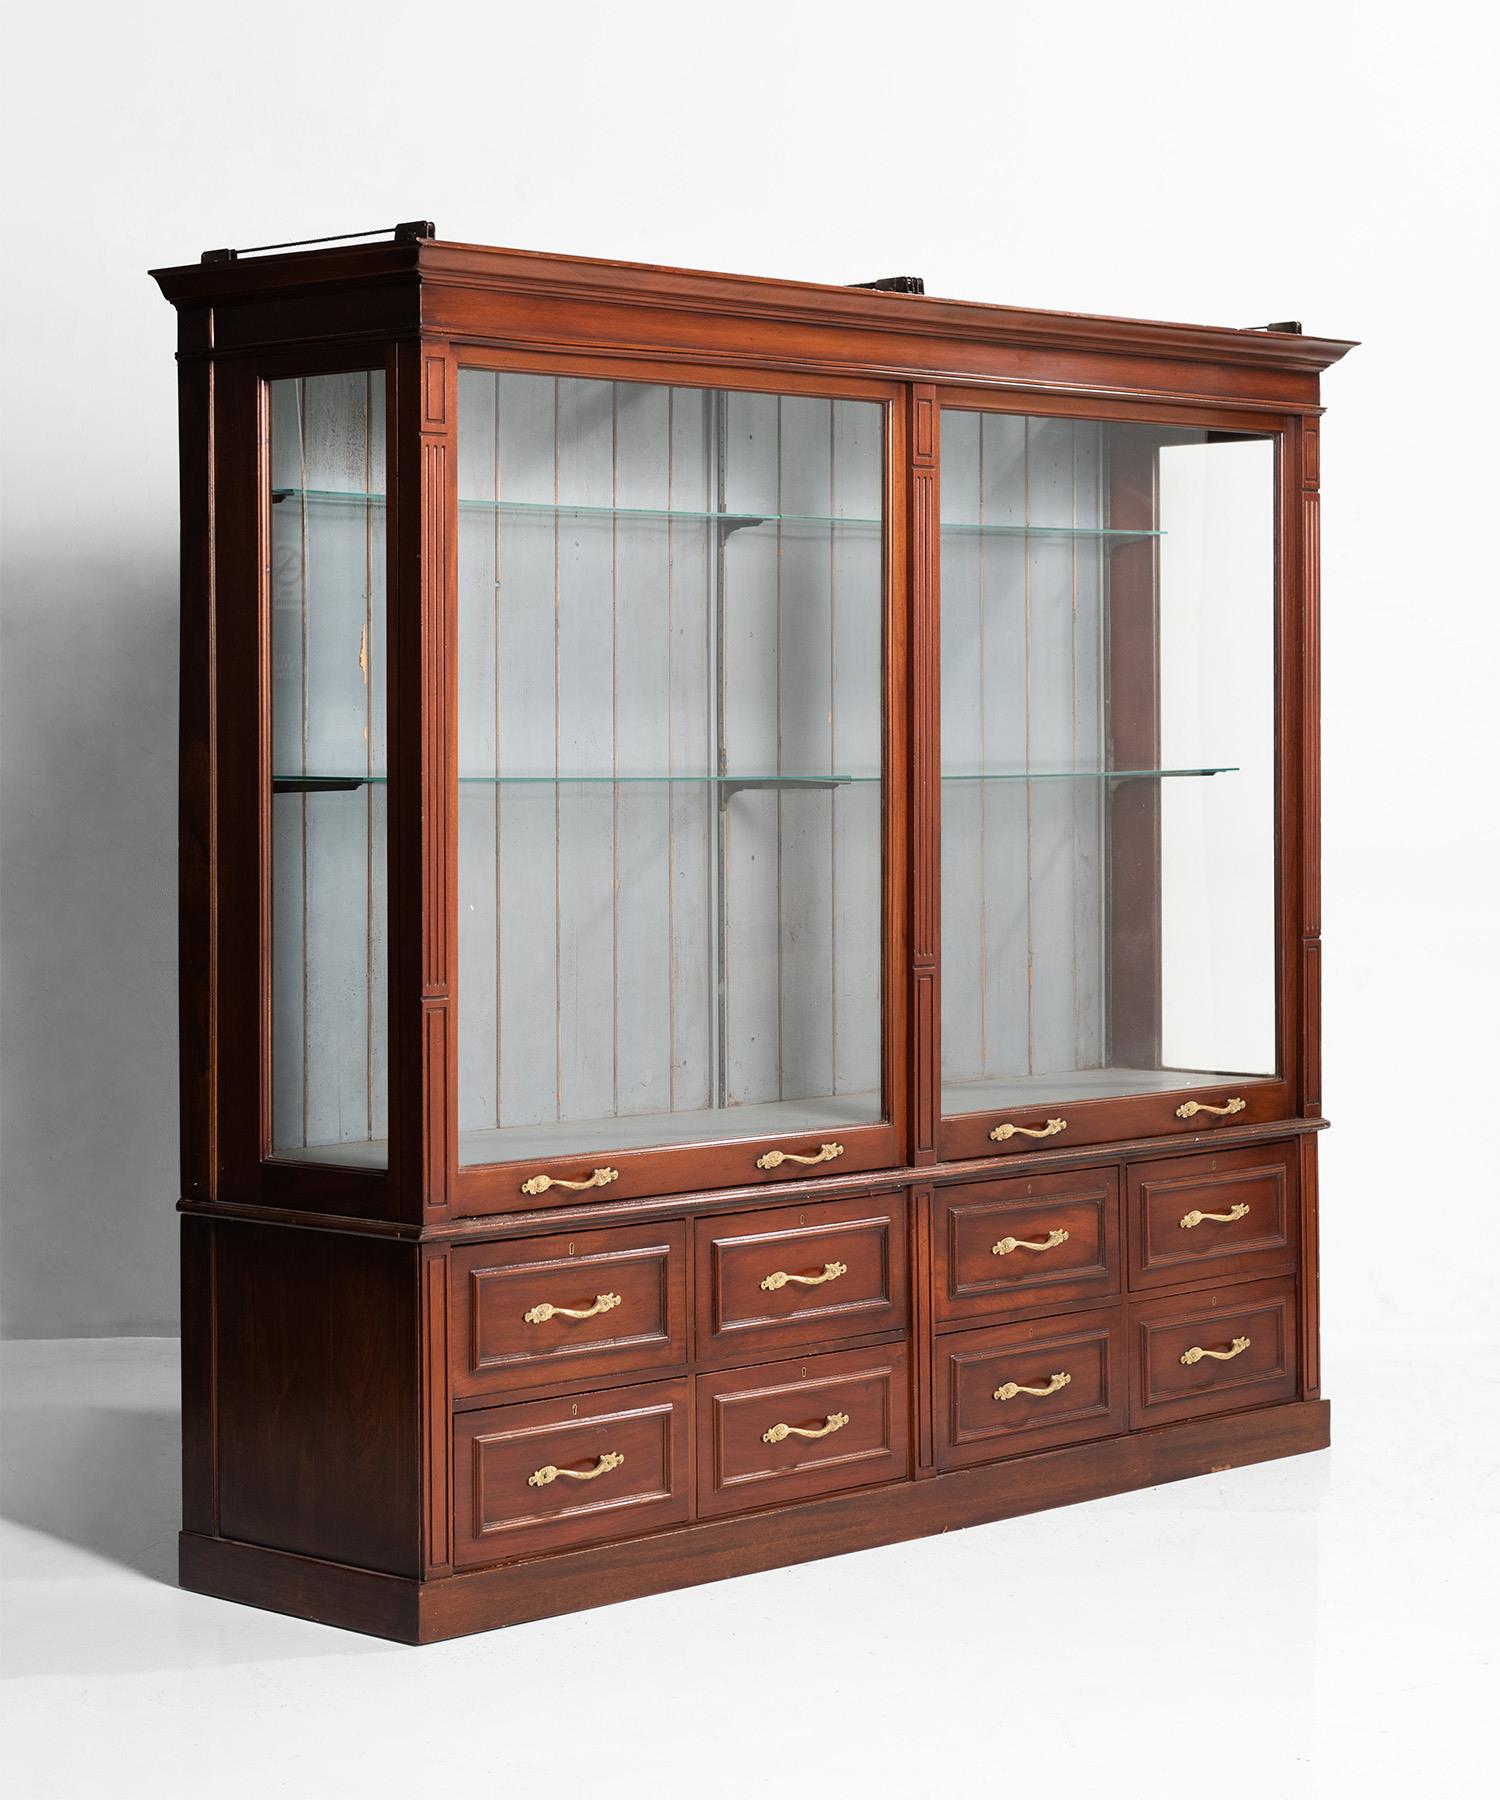 Shop fitting display cabinet built with mahogany. Vertical sliding glass doors designed with weighted counterbalance.
 